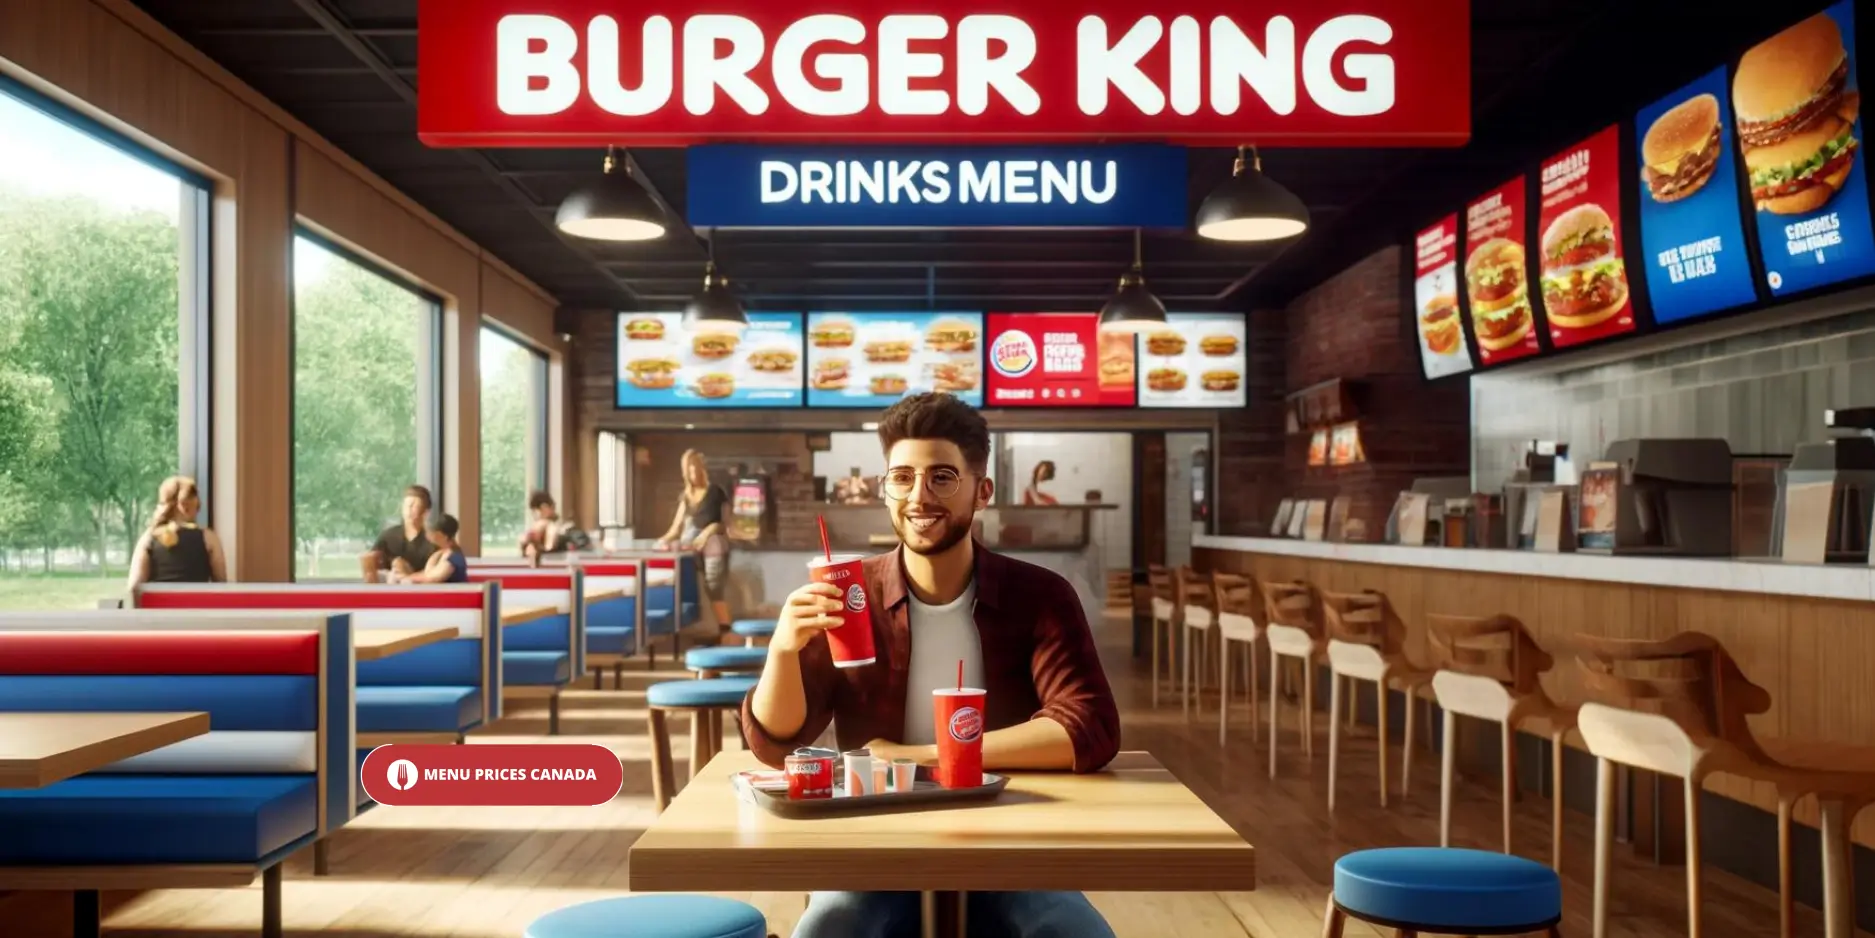 Burger-King-Drinks-Menu-with-prices-Canada